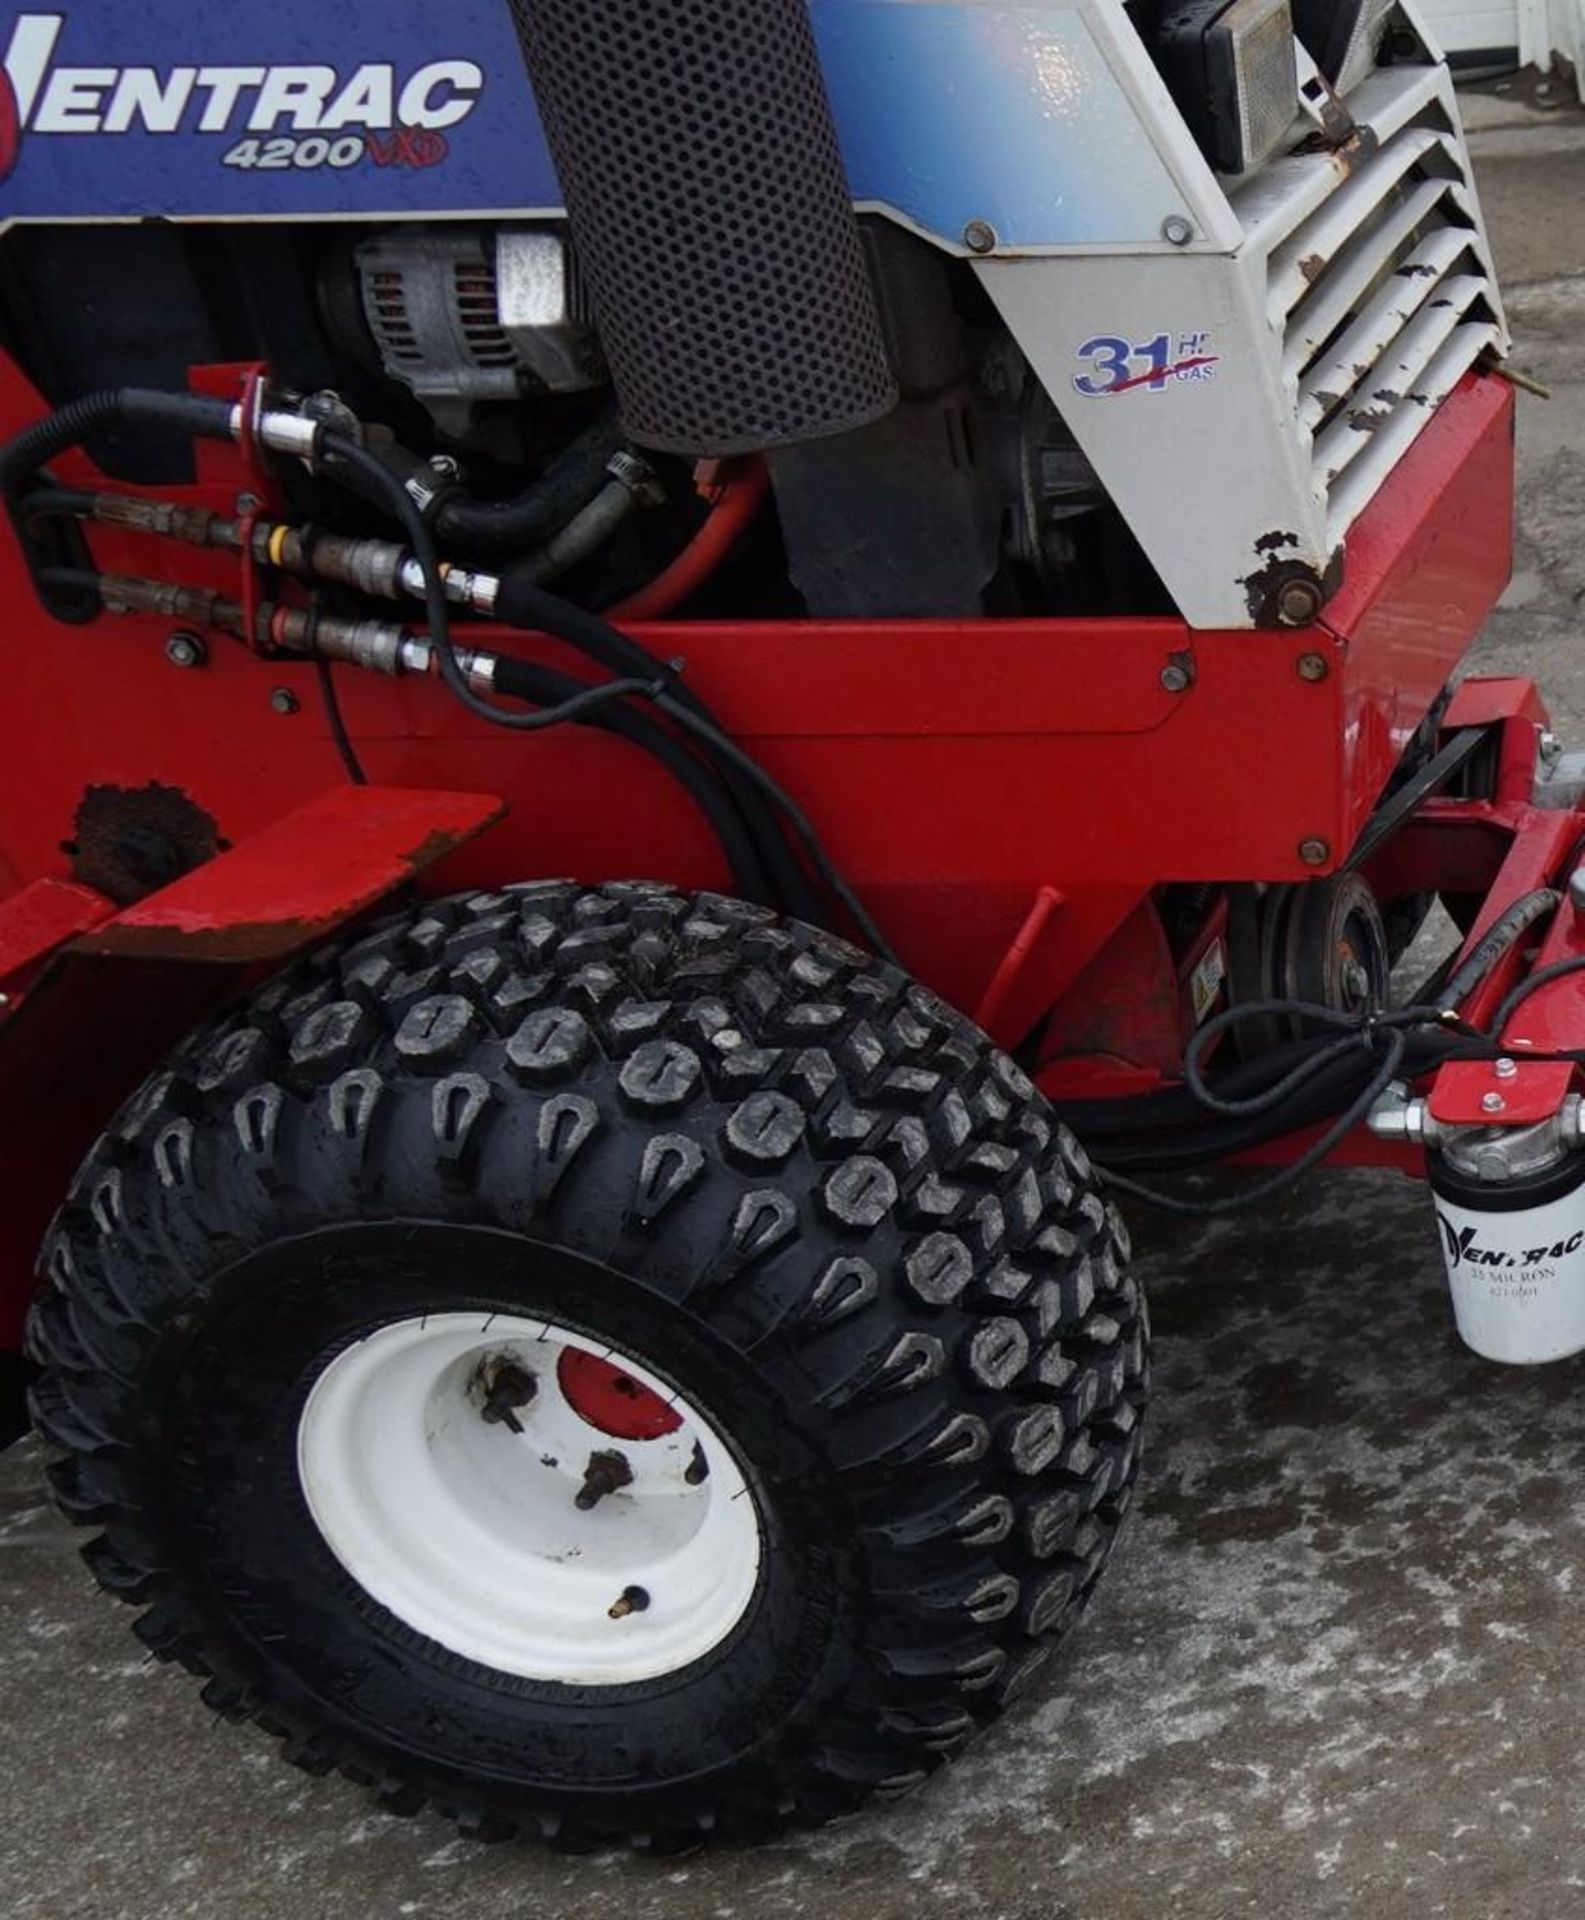 Ventrac 4200 Tractor - Image 14 of 37